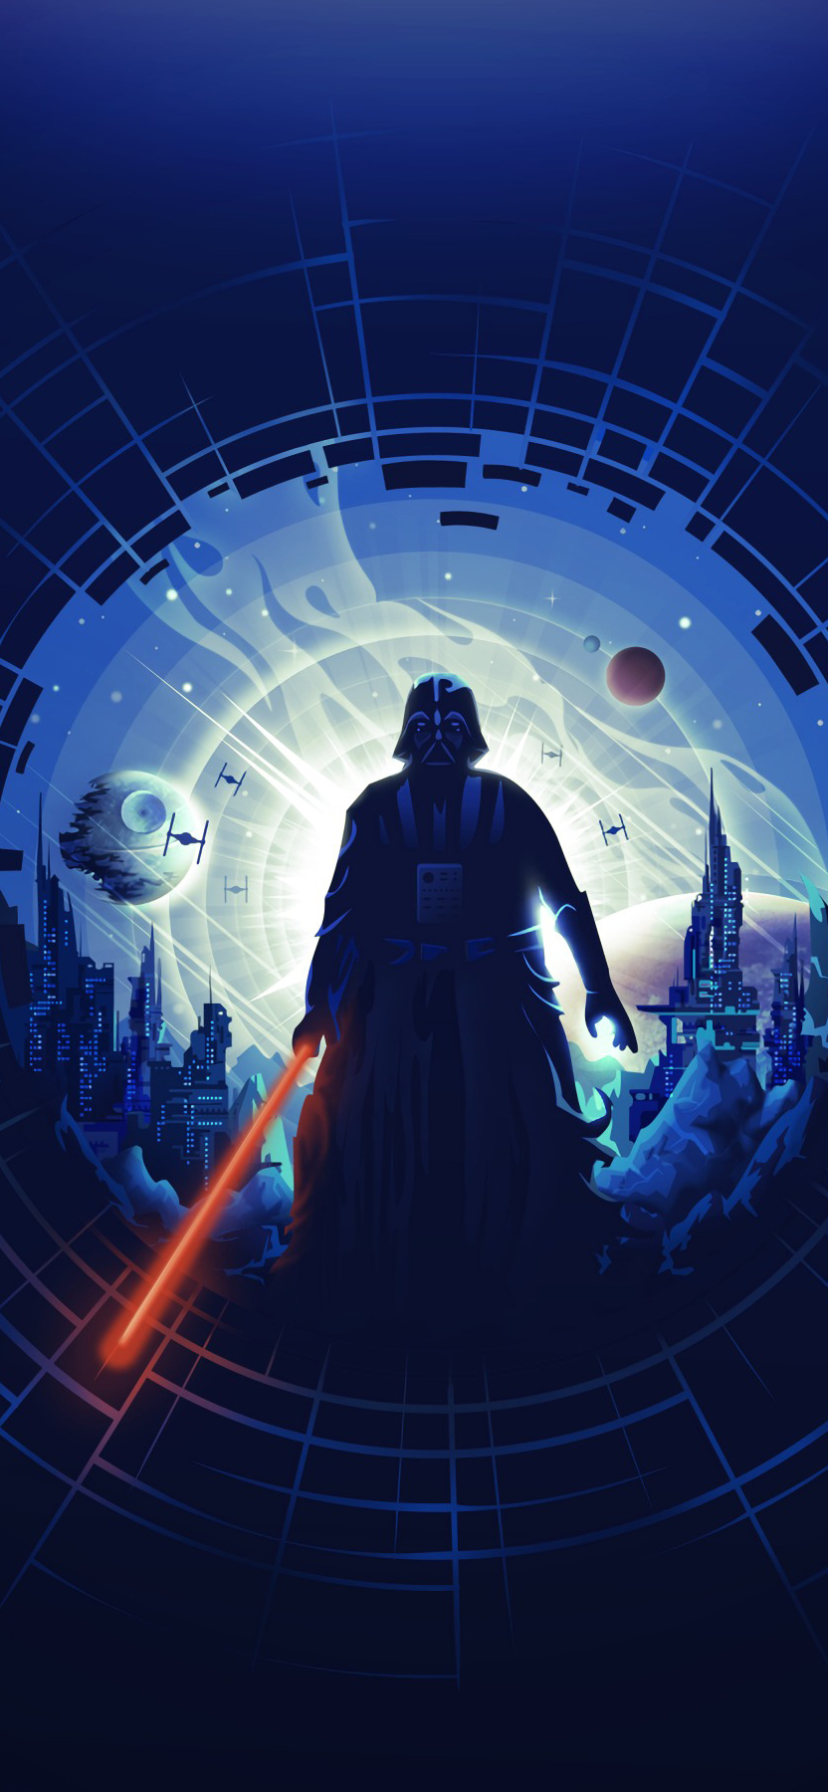 Download Star Wars wallpapers for mobile phone, free Star Wars HD  pictures